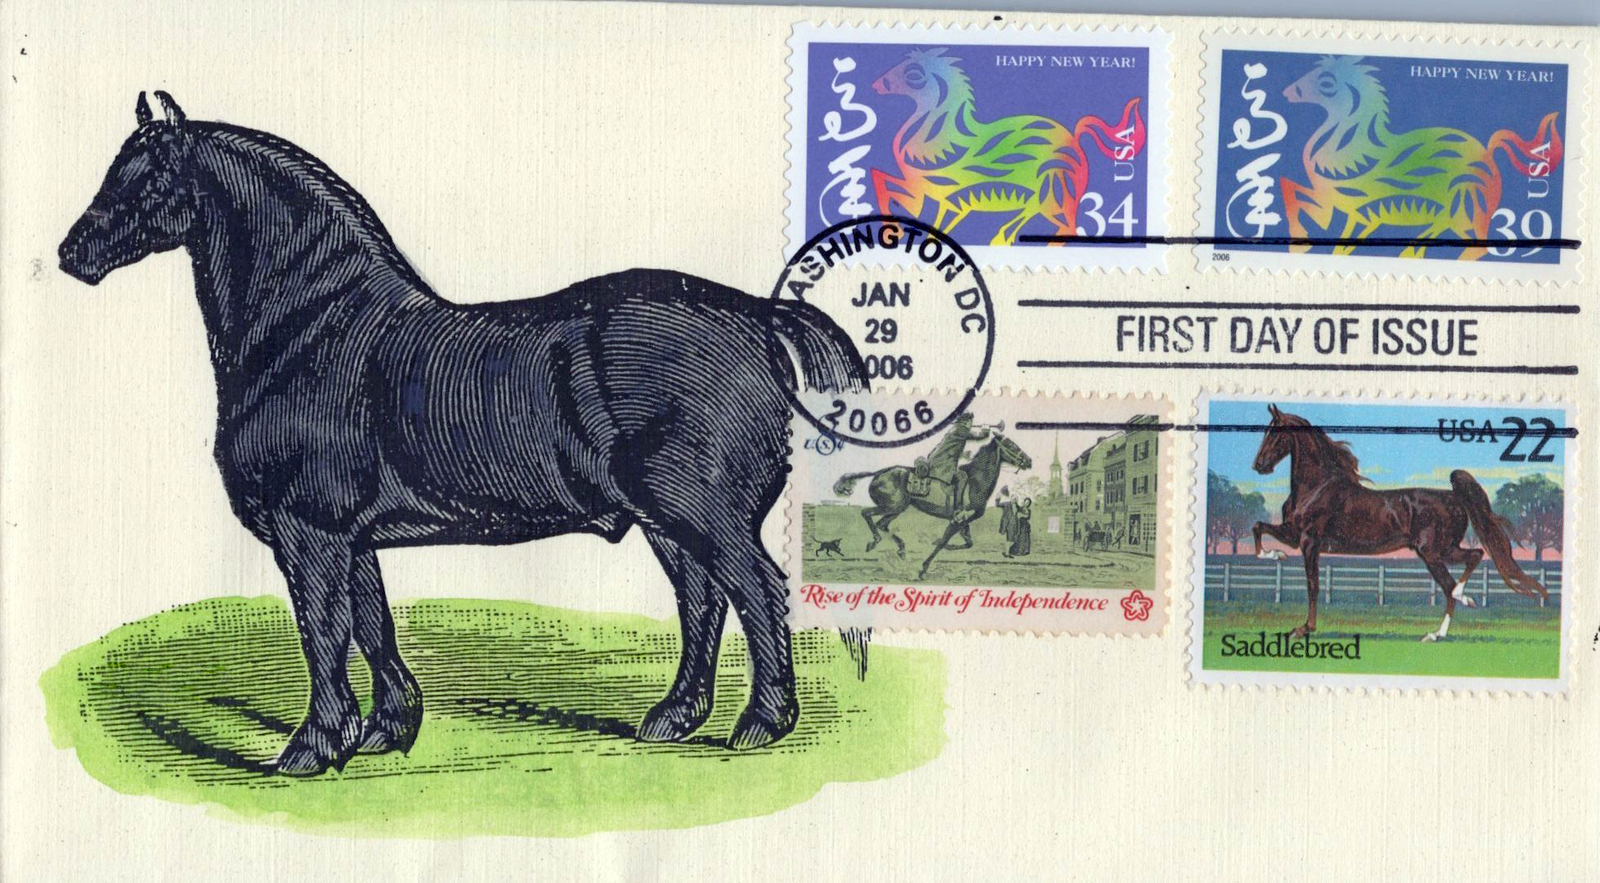 Primary image for US 3997g FDC Year of Horse, Lunar New Year, hand-painted SMB ZAYIX 1223M0226